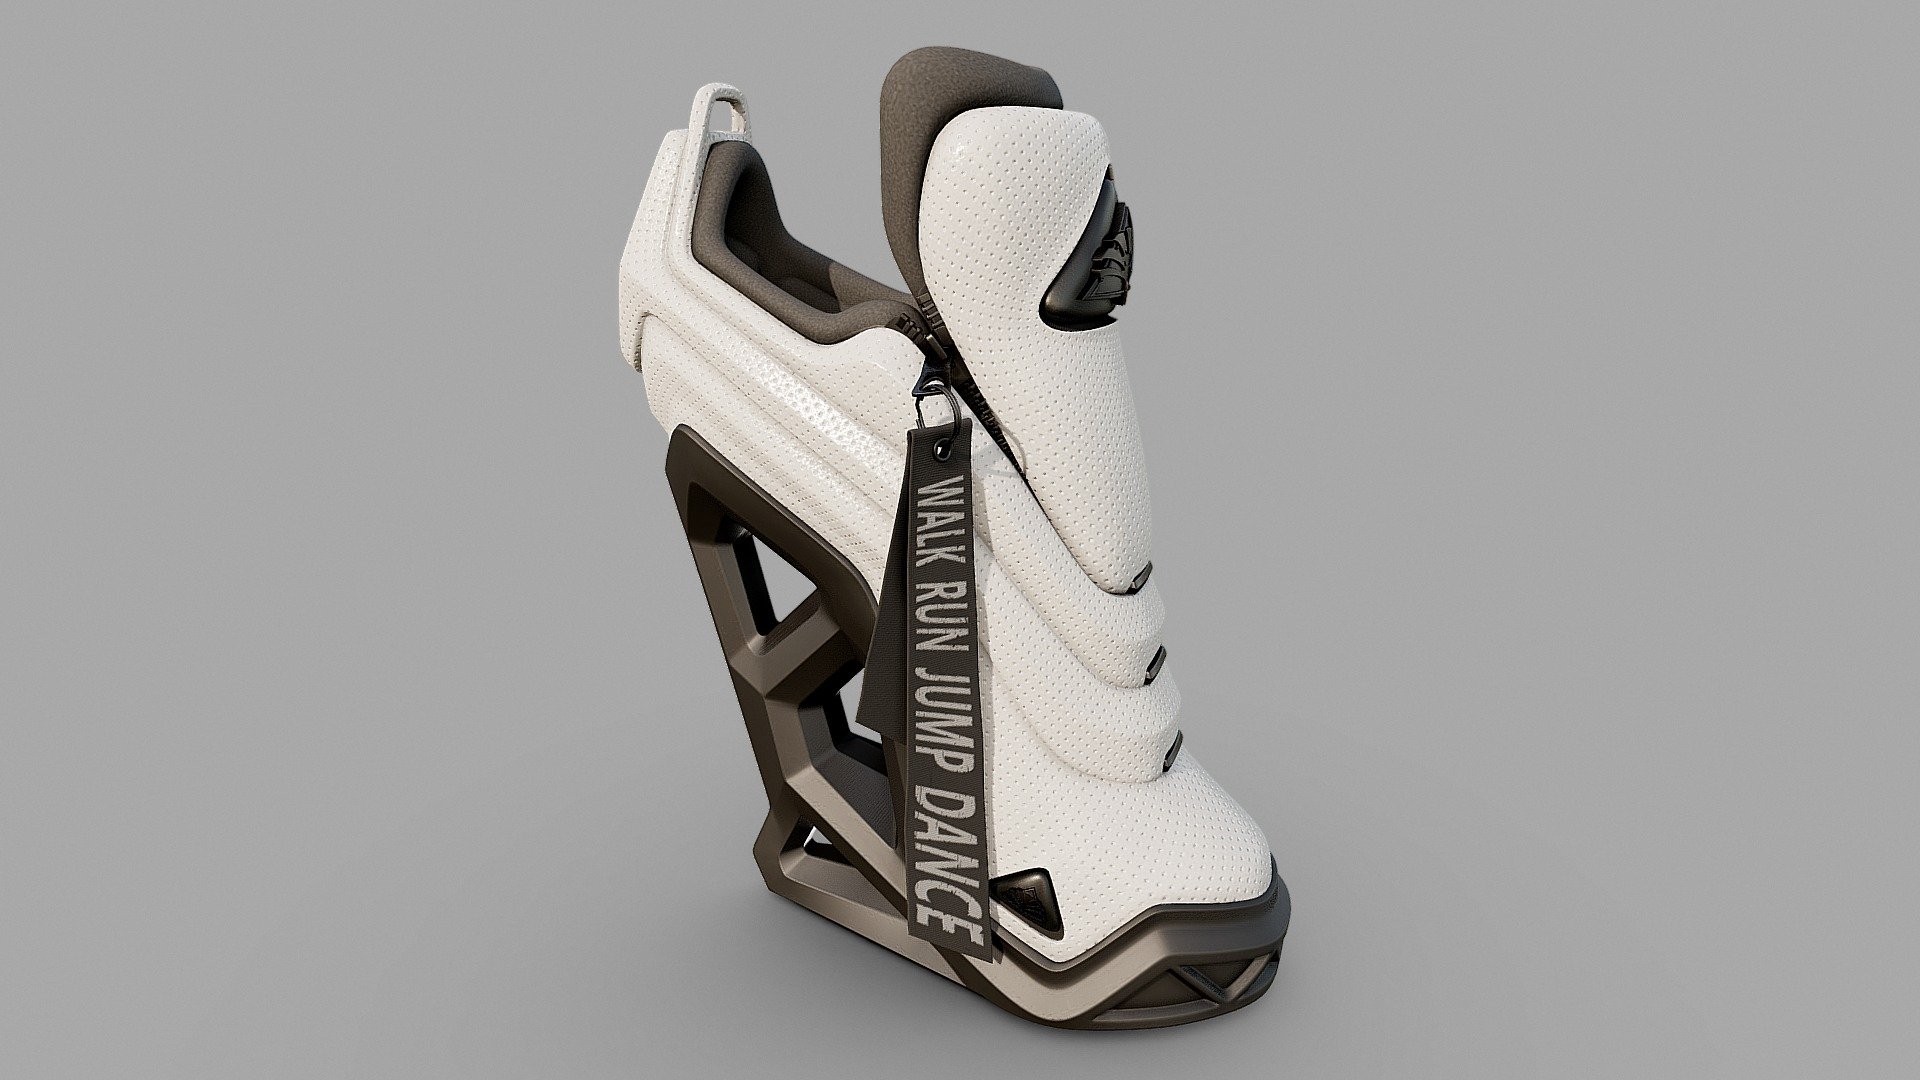 This model is perfect for character creation, visualization, and a variety of other purposes. The boot was designed and sculpted with ZBrush and textured with Substance Painter for a realistic look and feel.The design exudes innovation and luxury, radiating an air of confidence and sophistication in street wear! Pumping the boot with a pump on the front will inflate air cushions around the feet, providing an unparalleled level of comfort. Thanks to a special sole, the platform provides a one-of-a-kind walking experience by reducing the sound of each step to the whisper of a falling feather! And the special sensors will gather all the necessary data to optimize your wellness experience.

BEHANCE presentation https://www.behance.net/gallery/178998135/COMFY-HEELS-CRYPTO

Unreal Engine 5.1.1 version with a mirrored pair of heels included!

See the versions:
(BLK) https://skfb.ly/oDIHz
(BLK&amp;GLD) https://skfb.ly/oDVMI
(CAMO) https://skfb.ly/oE77n
(WHT&amp;GLD) https://skfb.ly/oFvZB
(GLD) https://skfb.ly/oJPCr - Comfy Heel (WHT & BLK) - Buy Royalty Free 3D model by Bartholomew Koziel (@bkoziel) 3d model